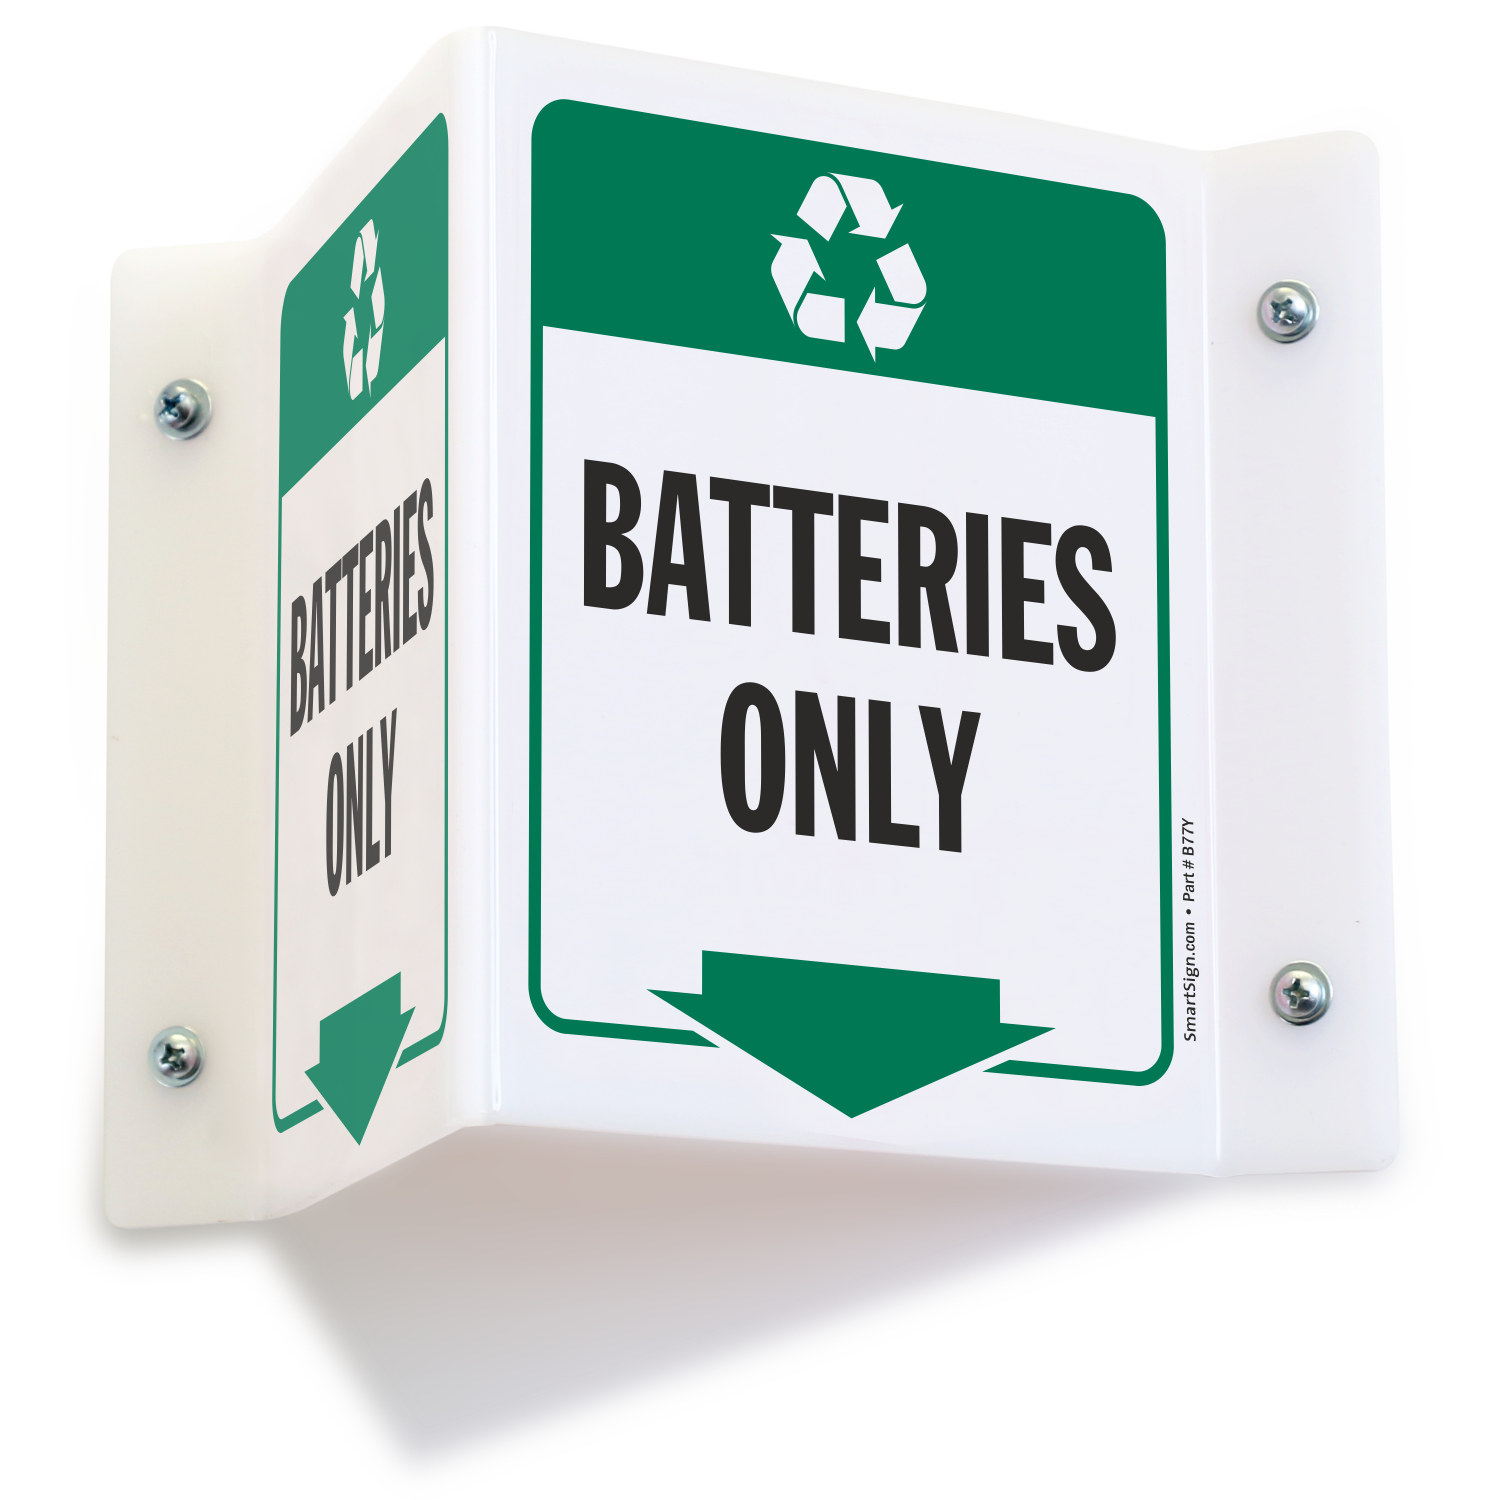 Recycle batteries. Recycling sign. Recycle sign PNG. Battery Recycling. Trash only.